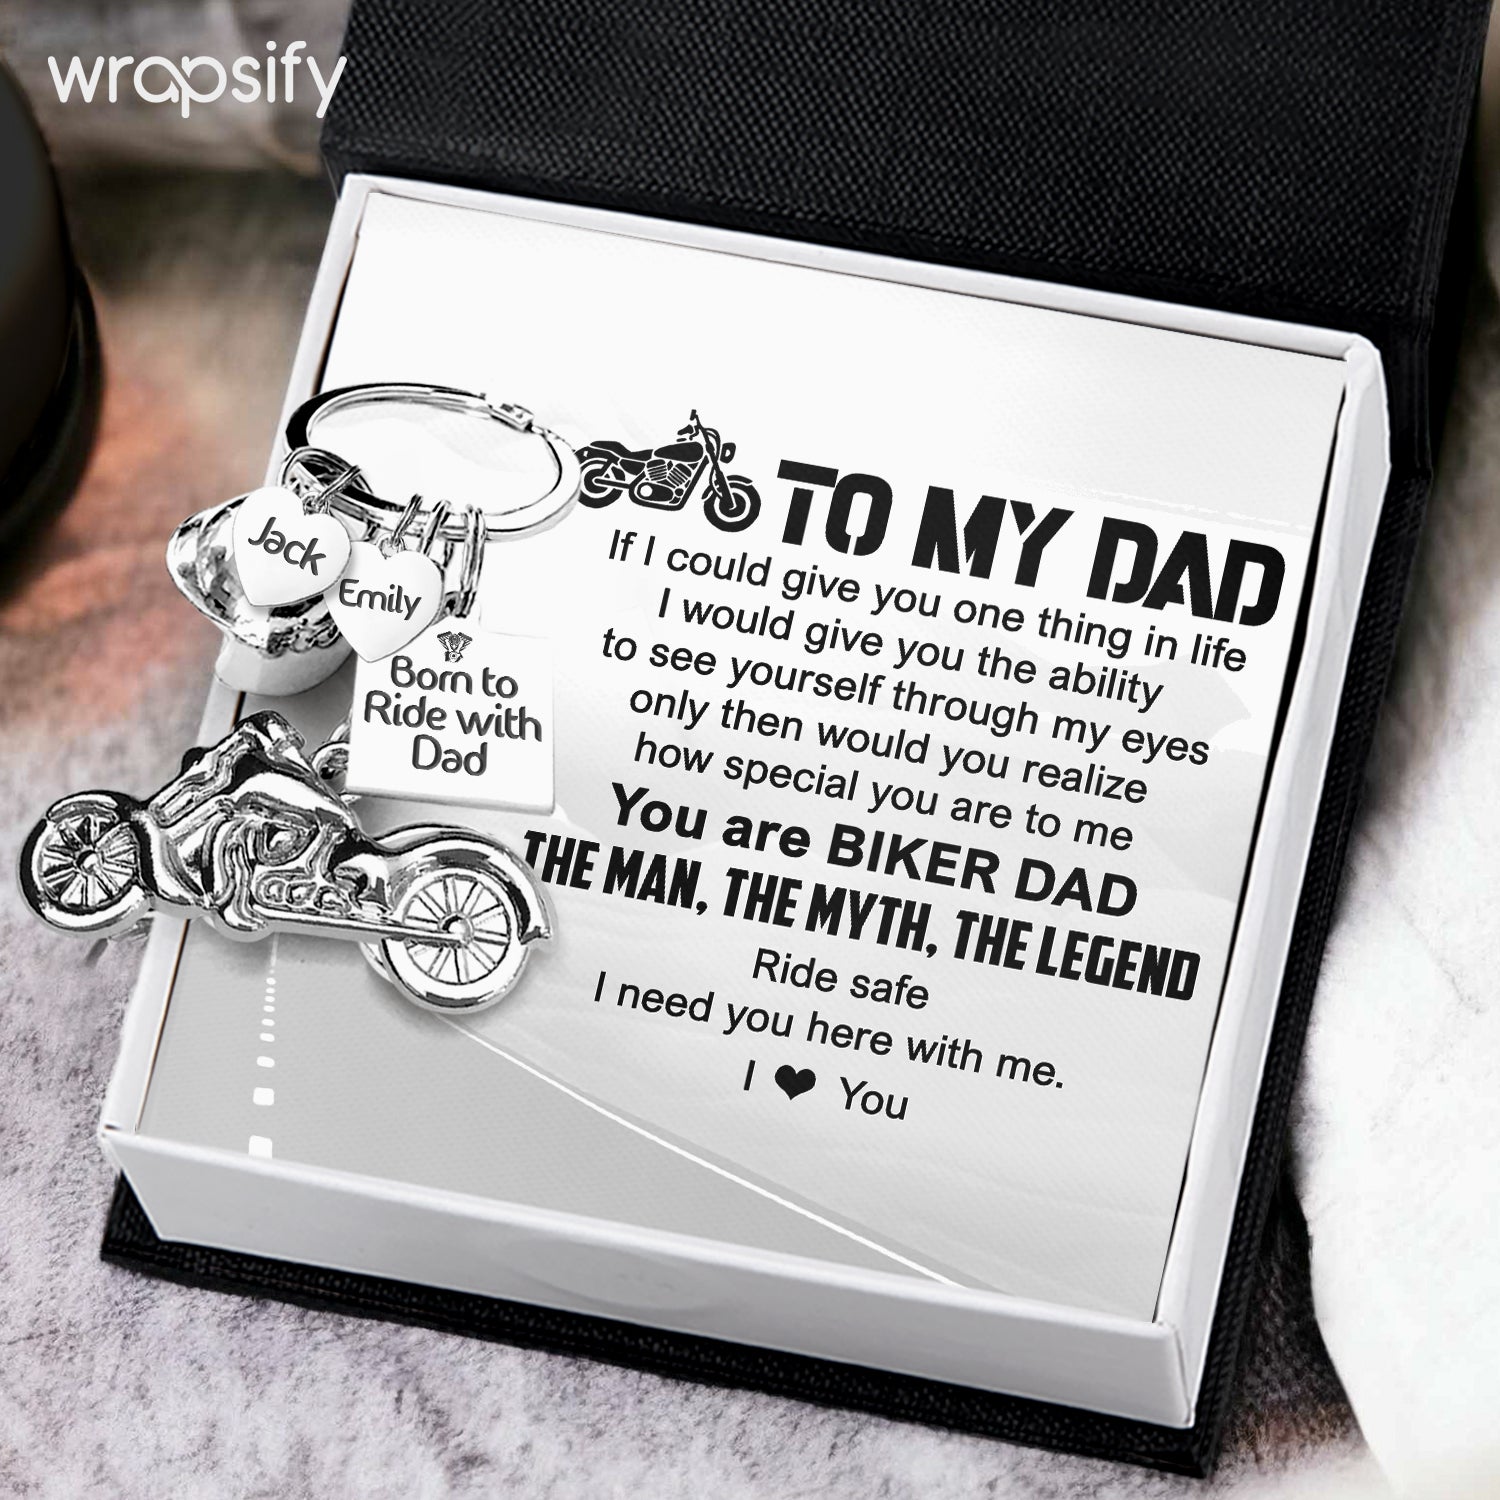 Fantastic Father's Day gift ideas from the kids